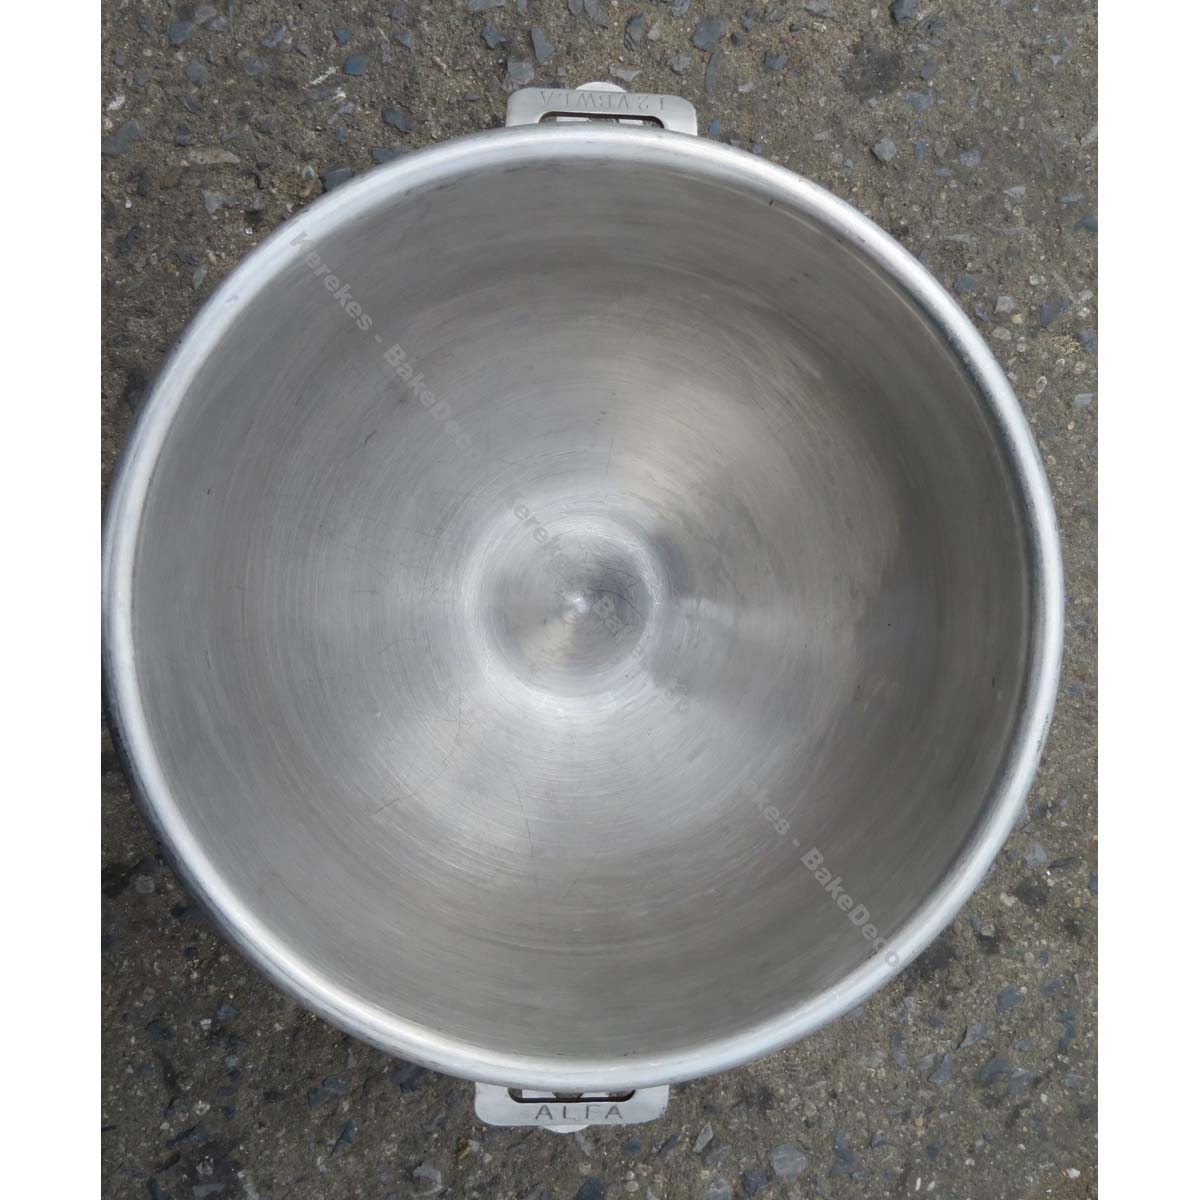 Hobart 00-295644 12 Quart Bowl to Fit A200 Mixer, Used Excellent Condition image 2